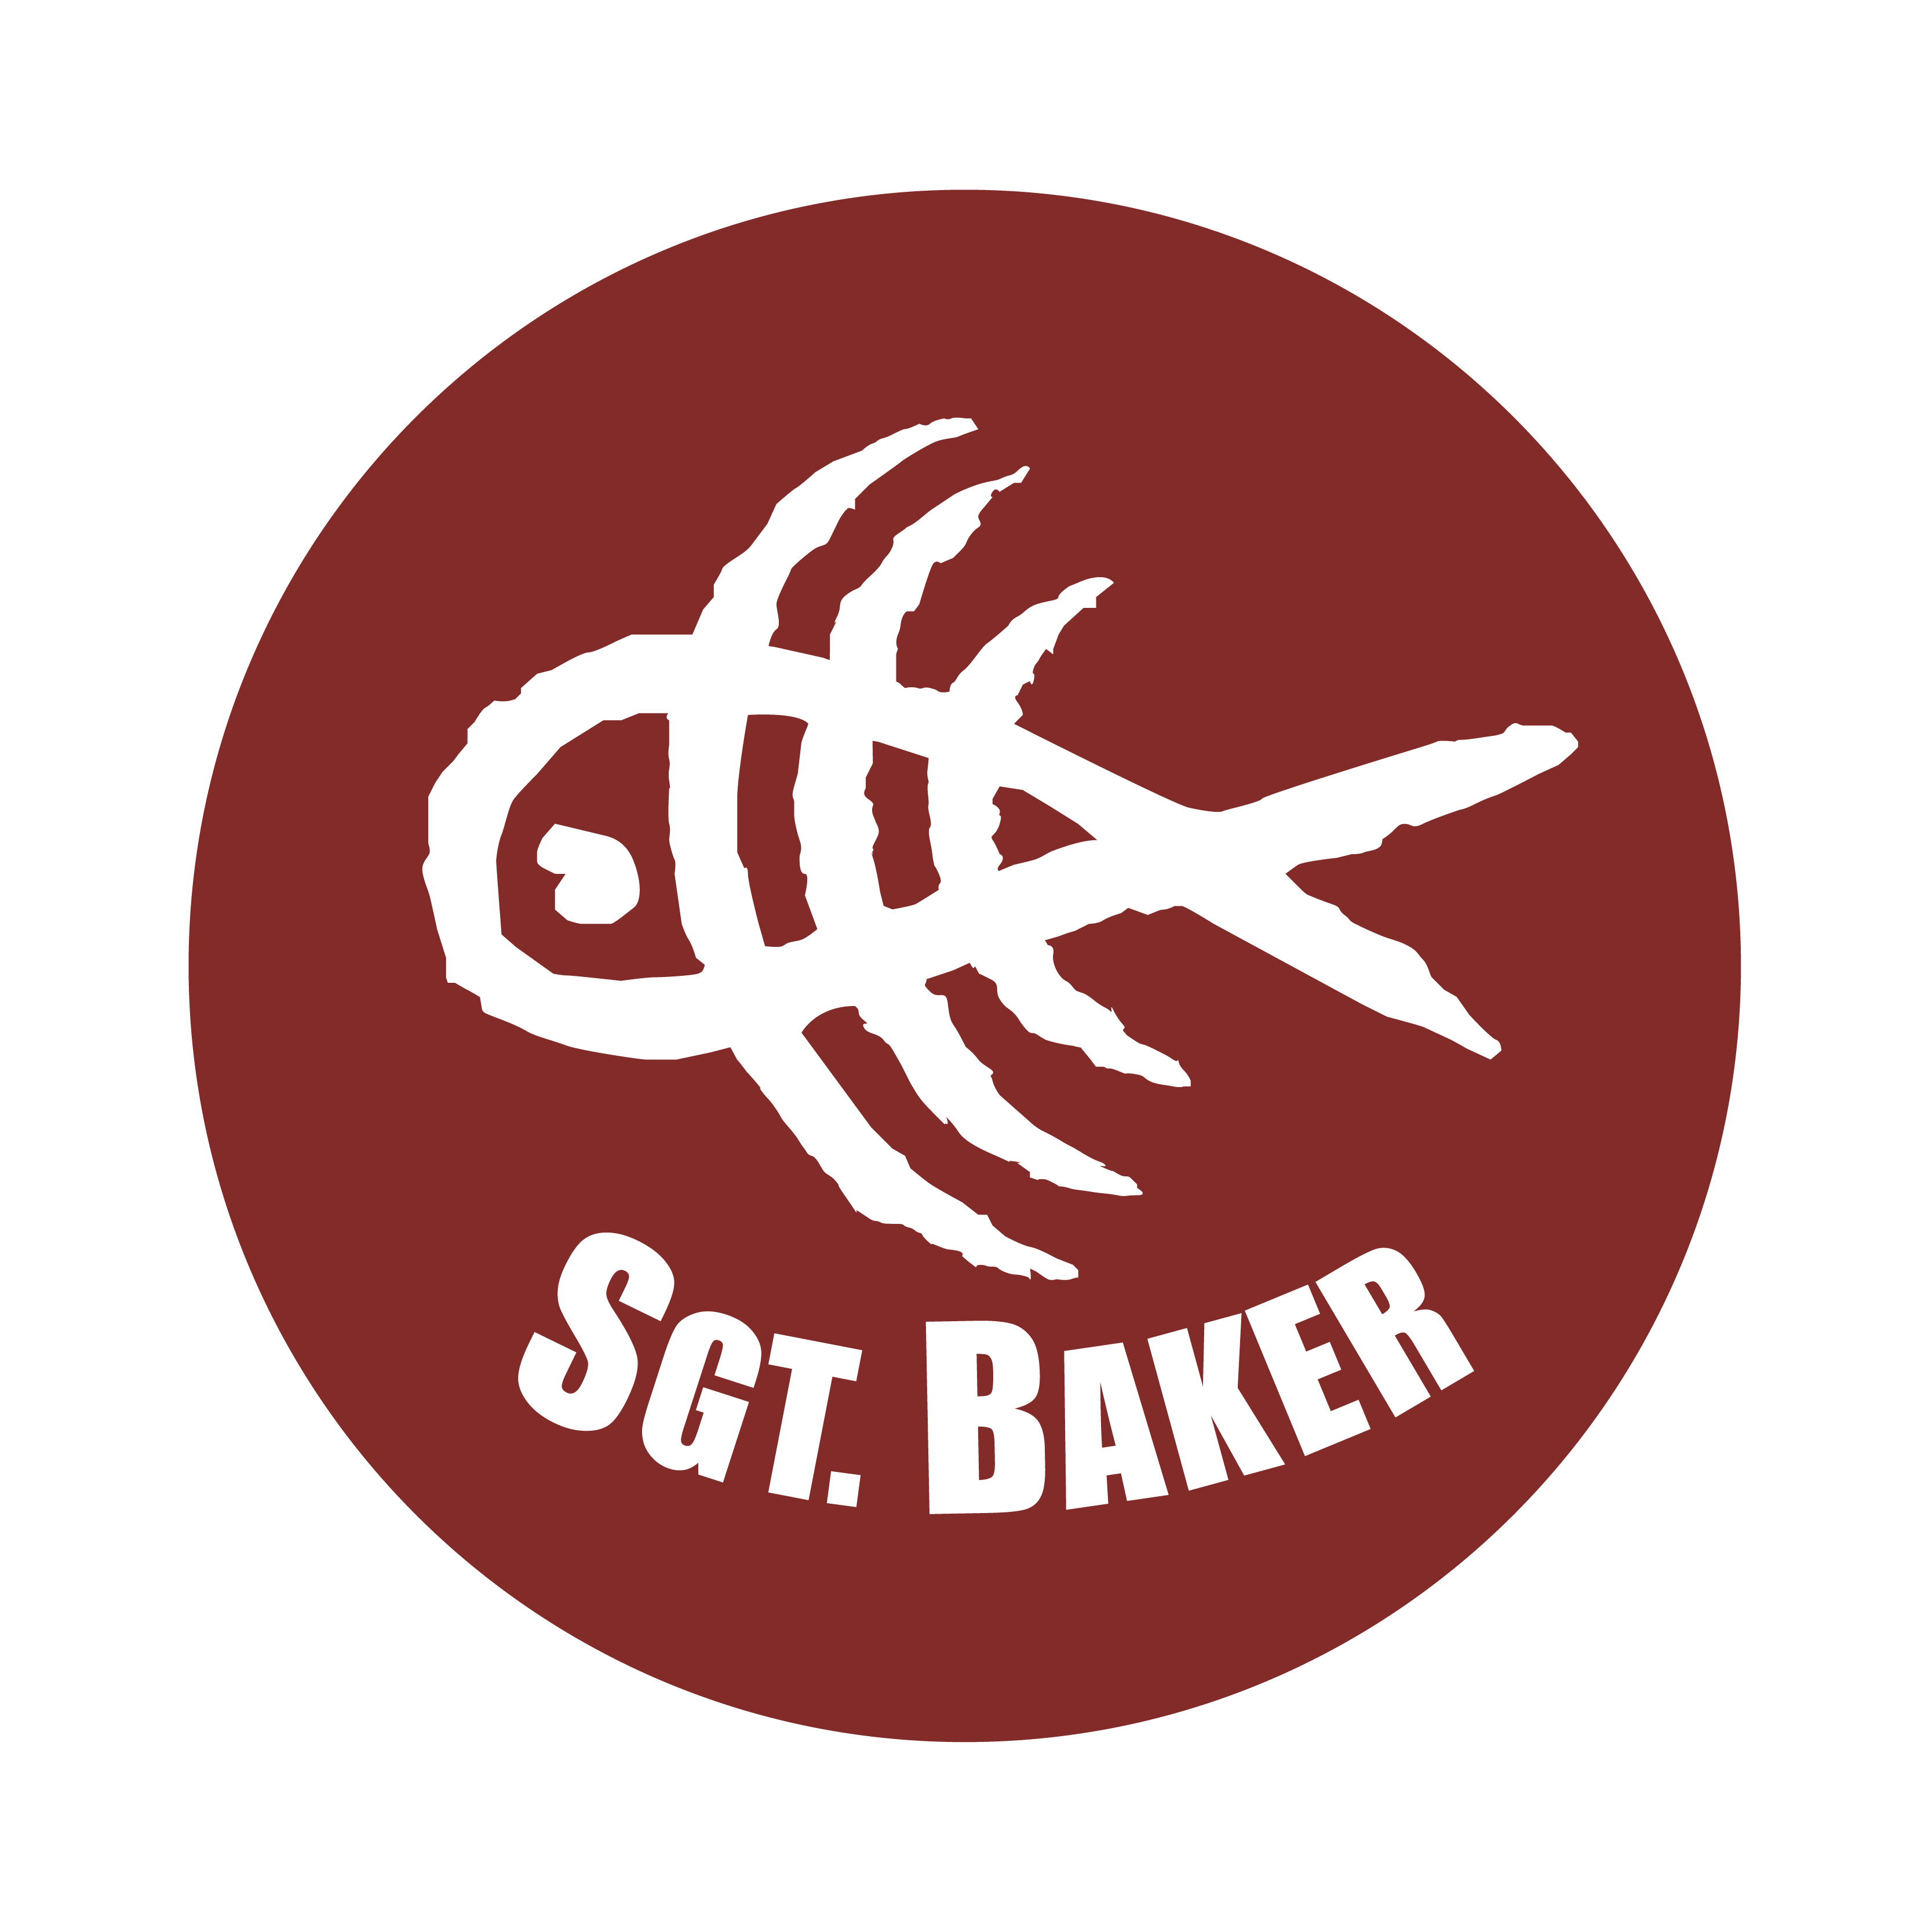 Sgt Bakers Fish and Chips